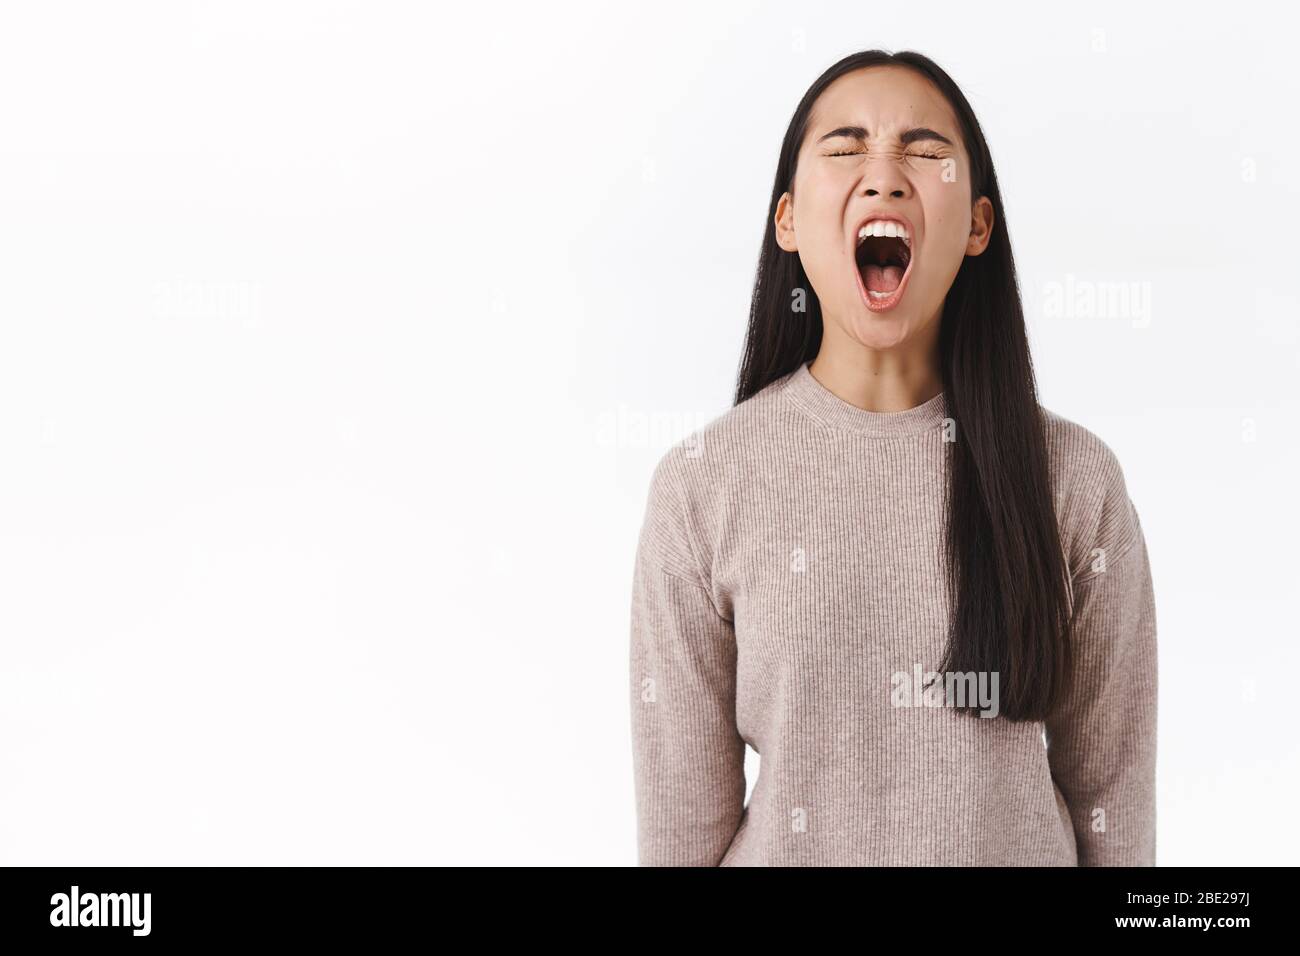 Fed up, outraged silly east-asian troubled teenager screaming bothered, being arrogant, shouting out loud with opened wide mouth, close eyes, whining Stock Photo